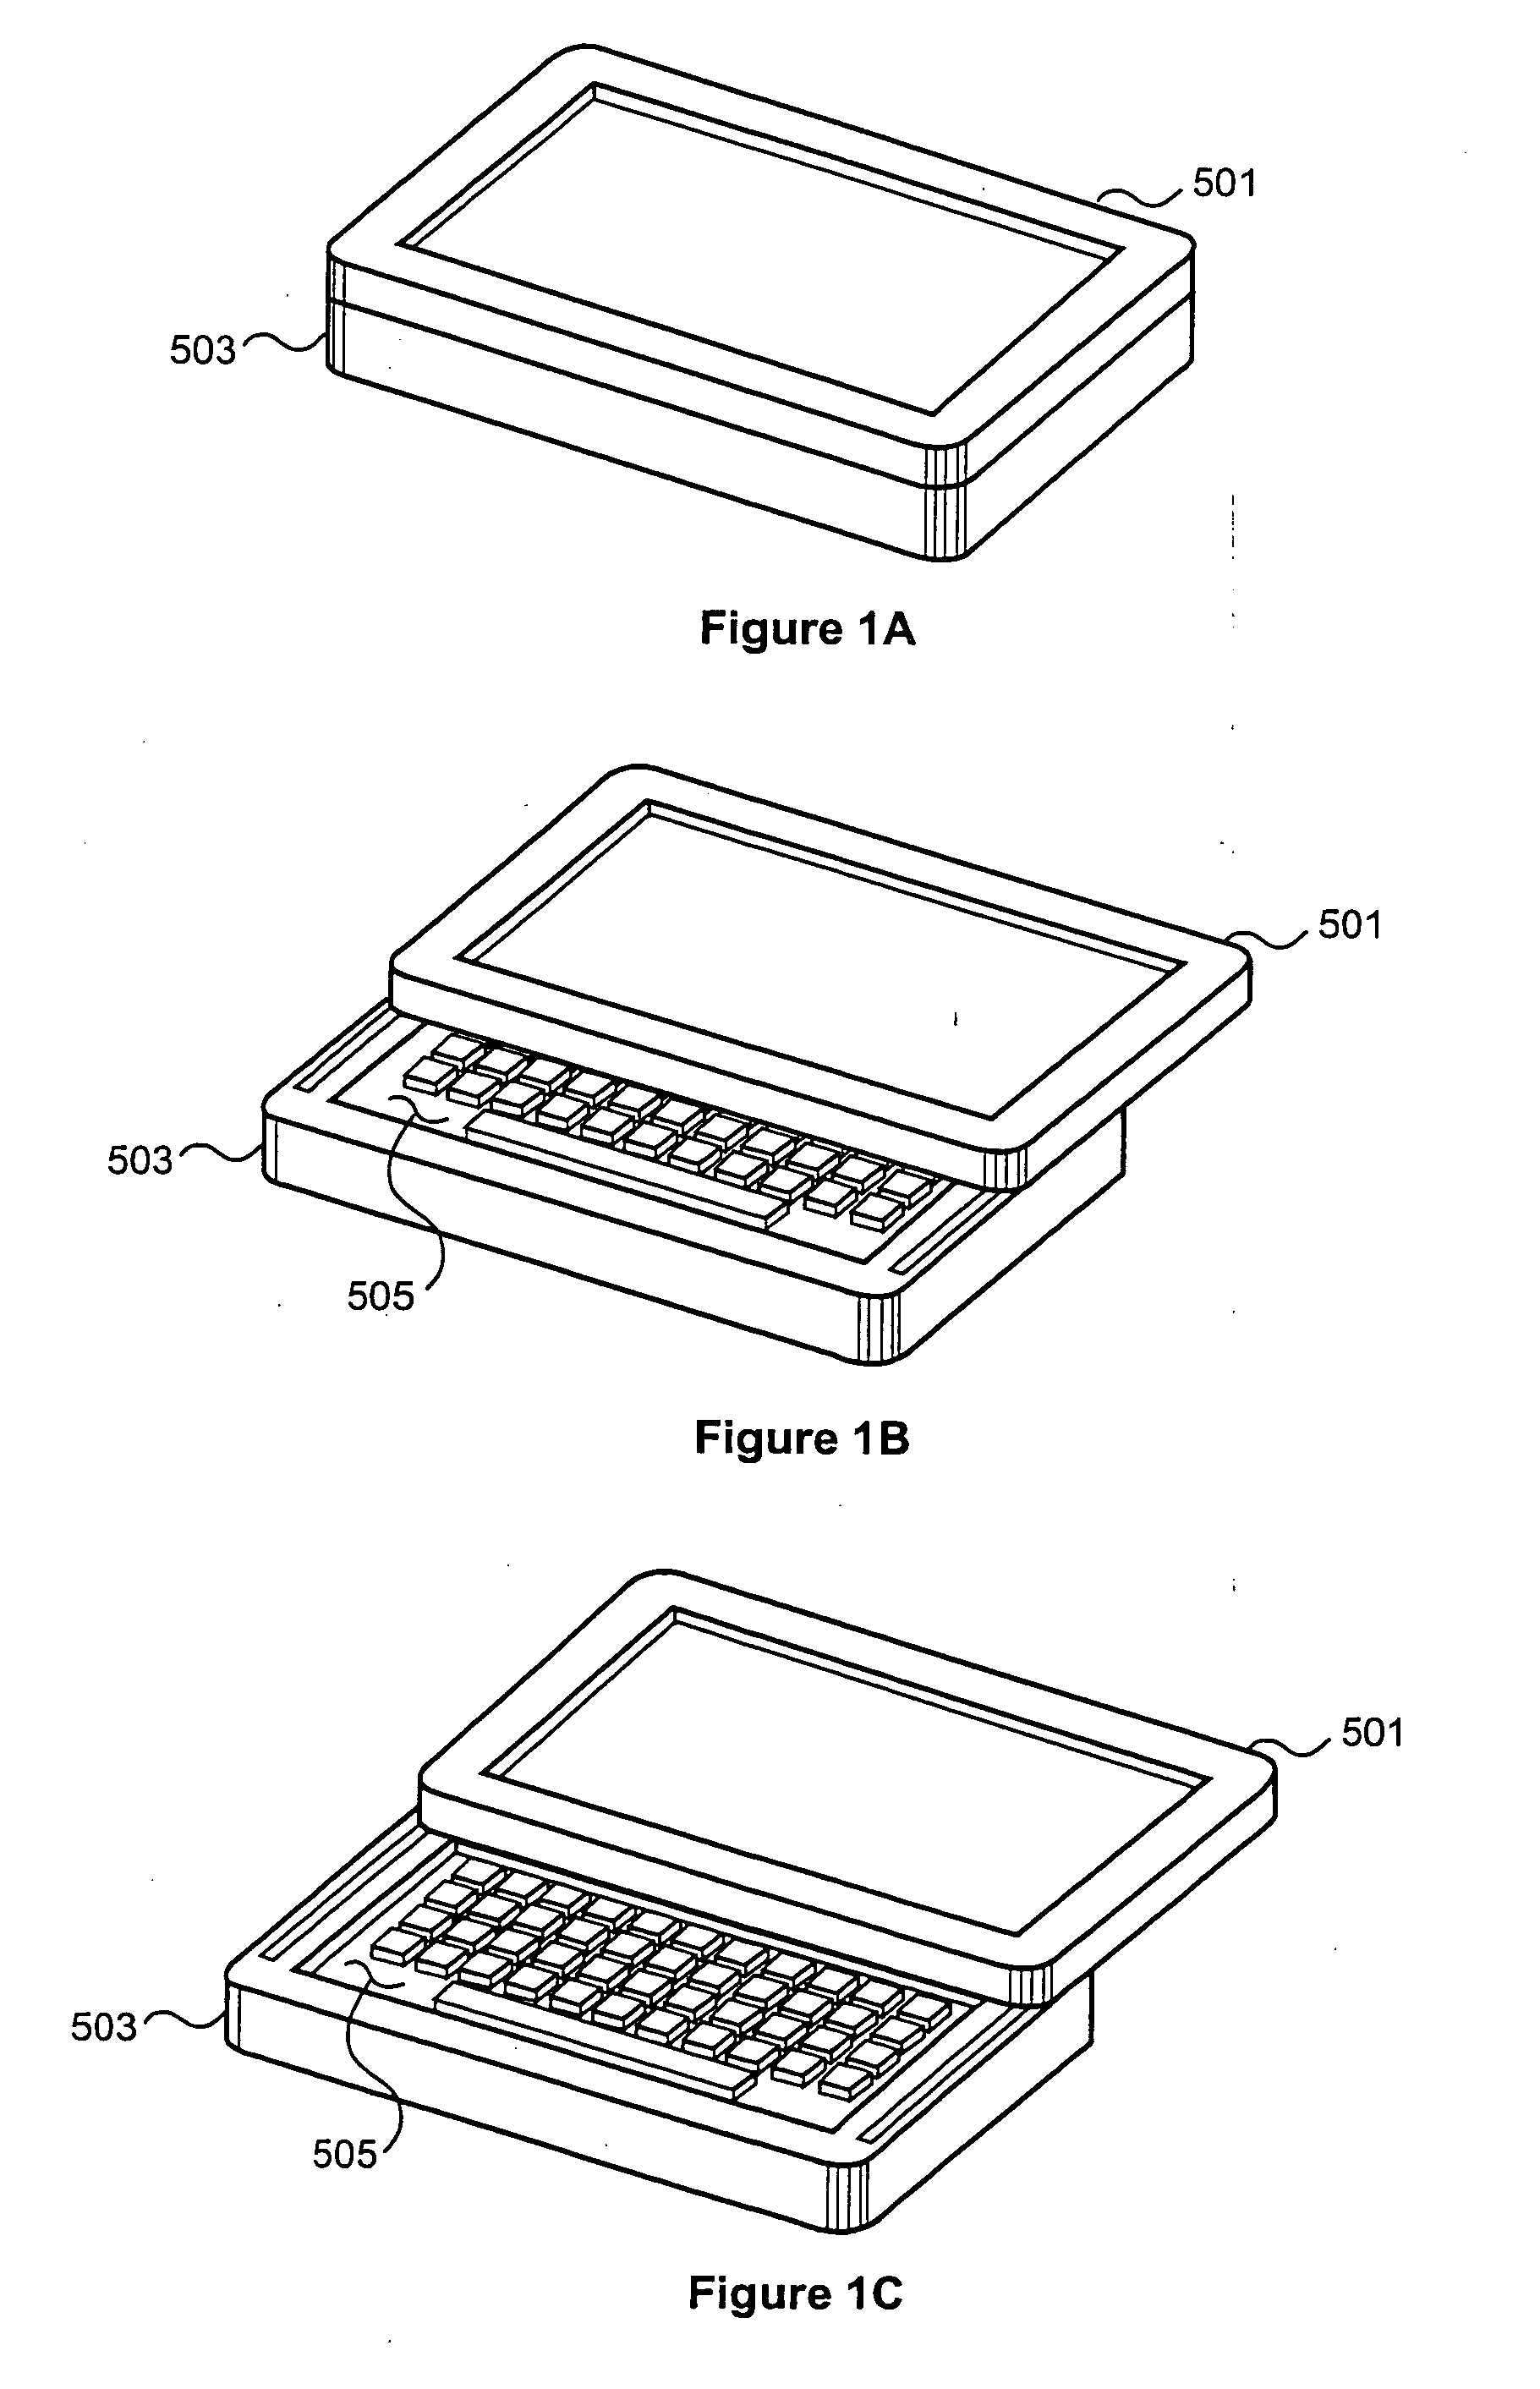 Physical configuration of a hand-held electronic communication device